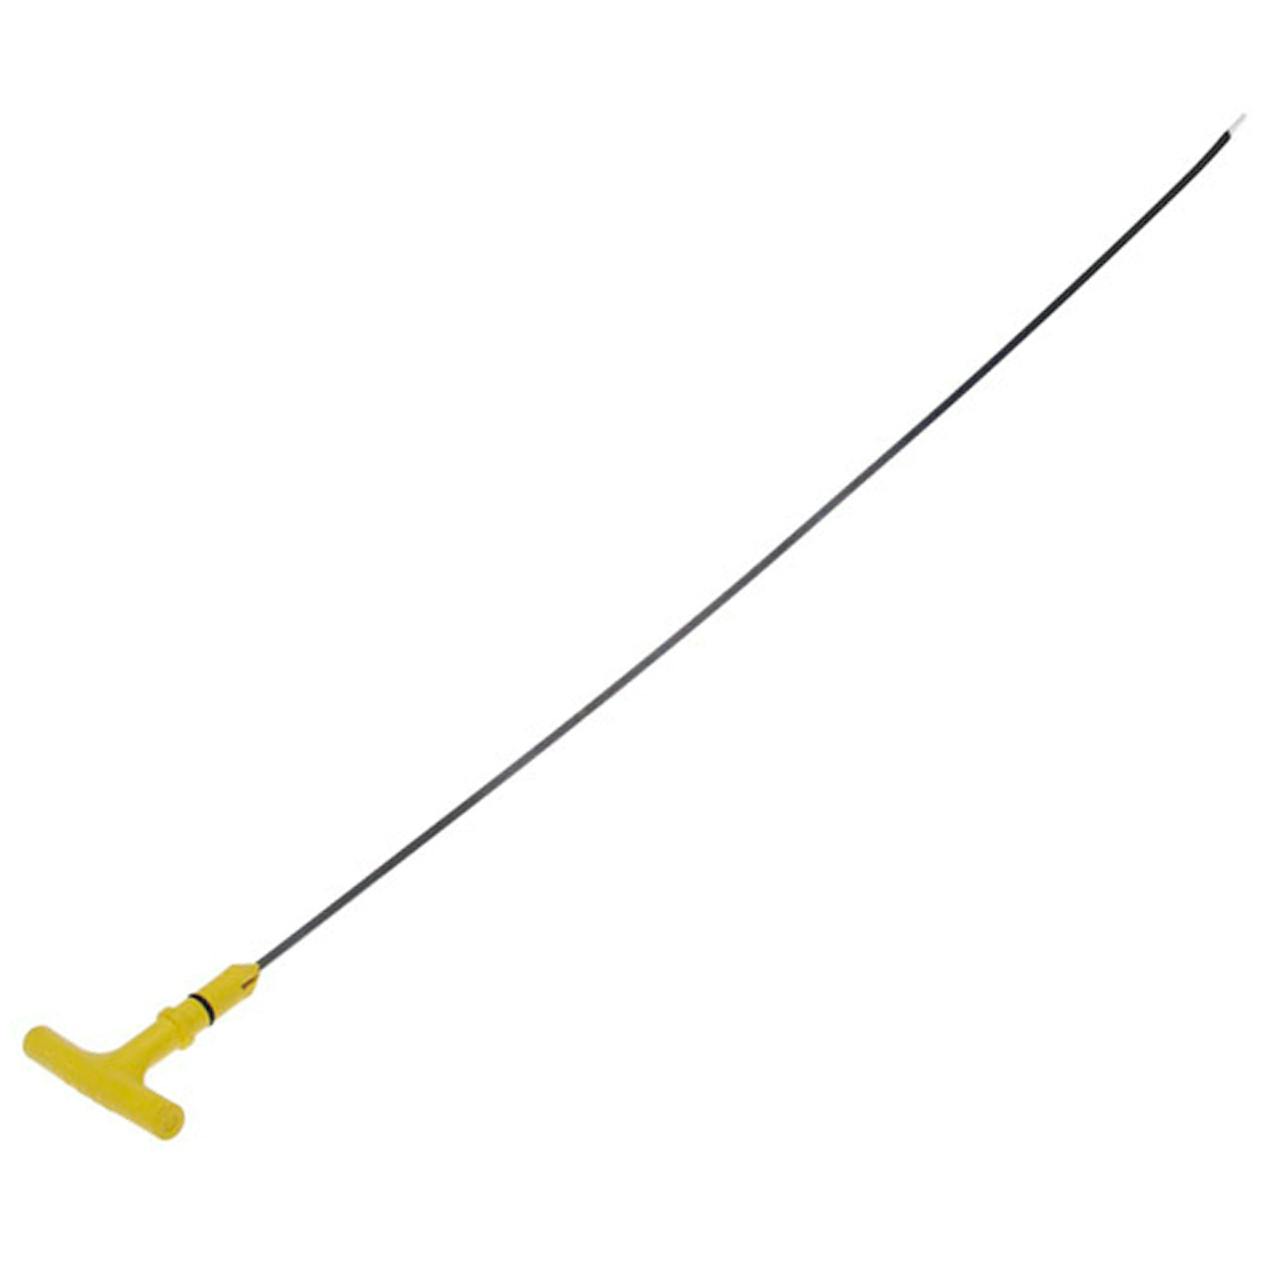 Engine Oil Dipstick 1174.85 Replacement For 206 207 307 With 1.4 HDi Die